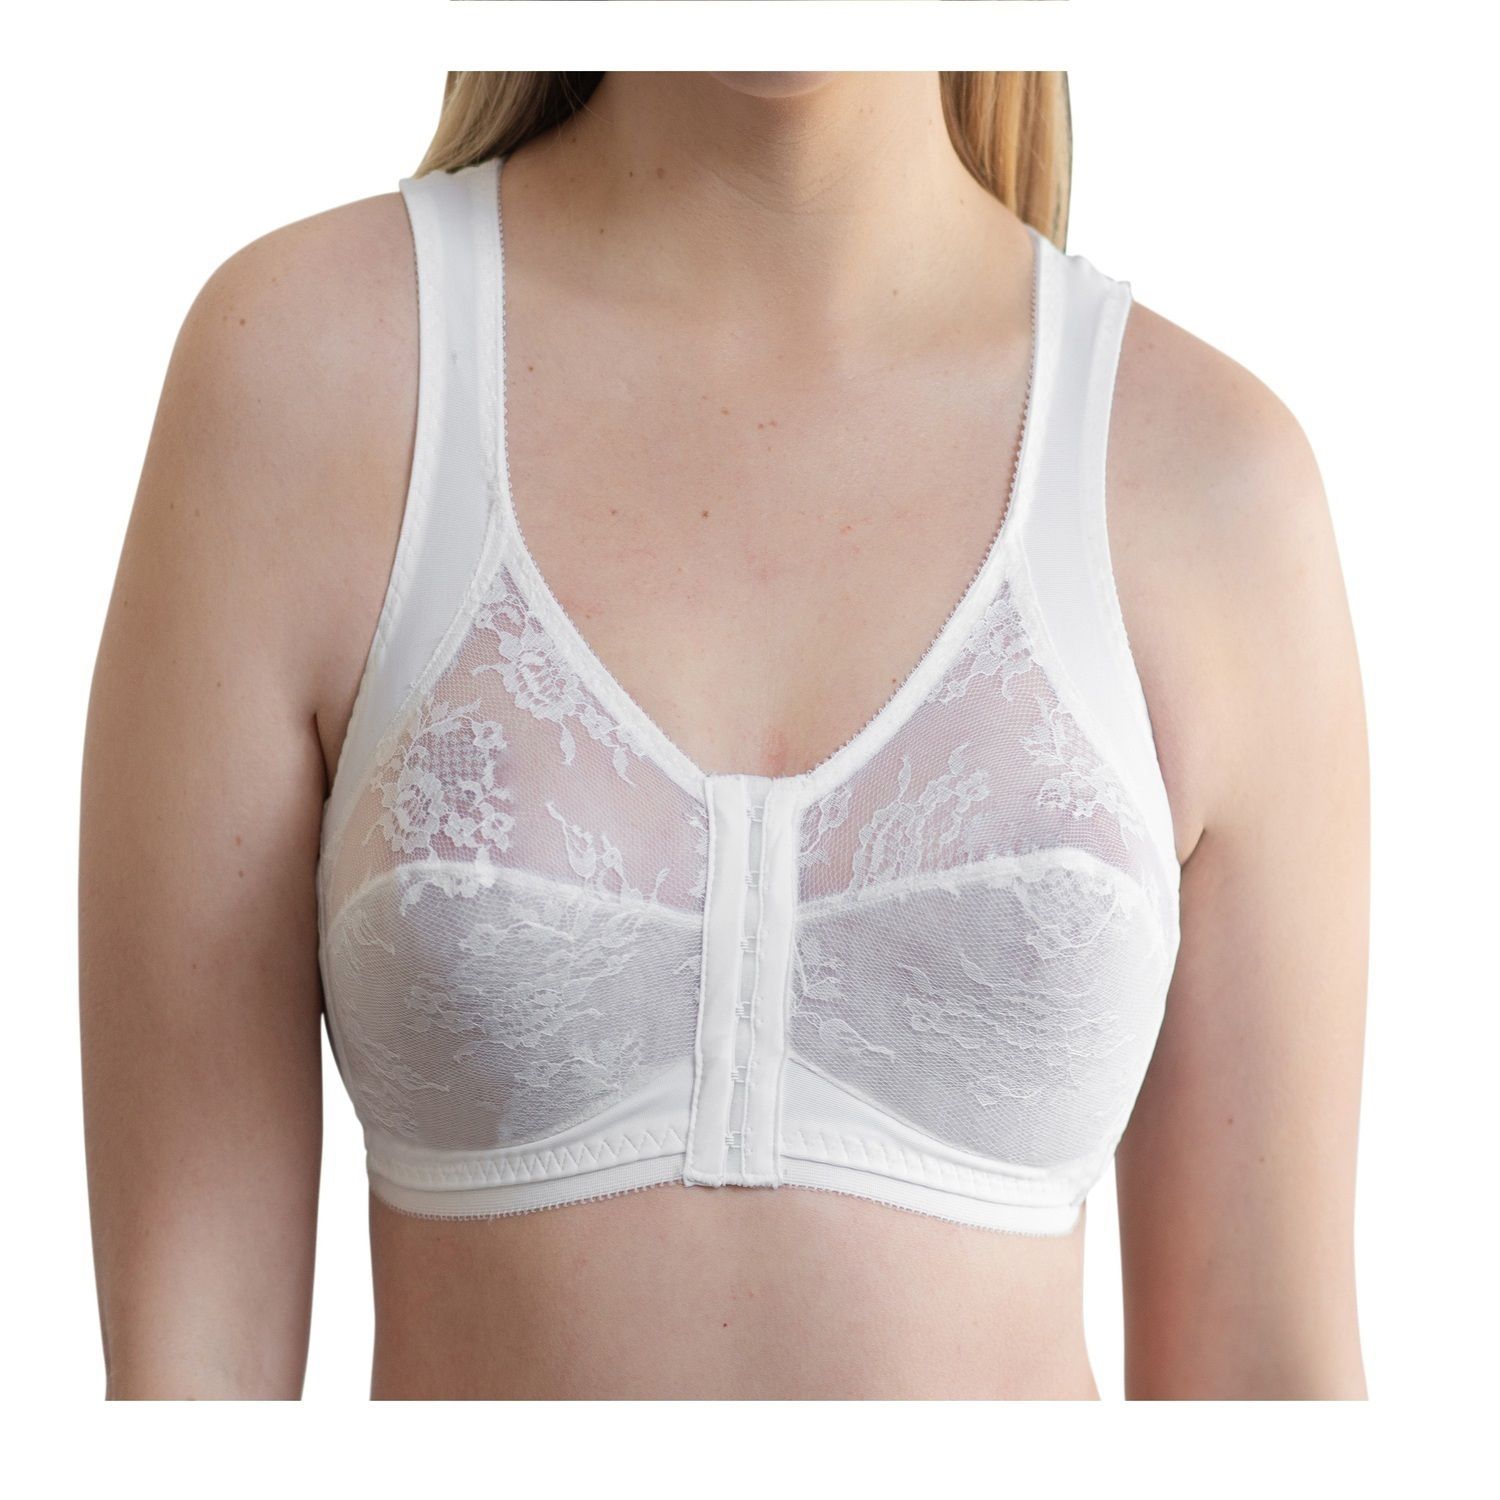 Looked at some bras at kohl's and I'm discouraged. Recommendations